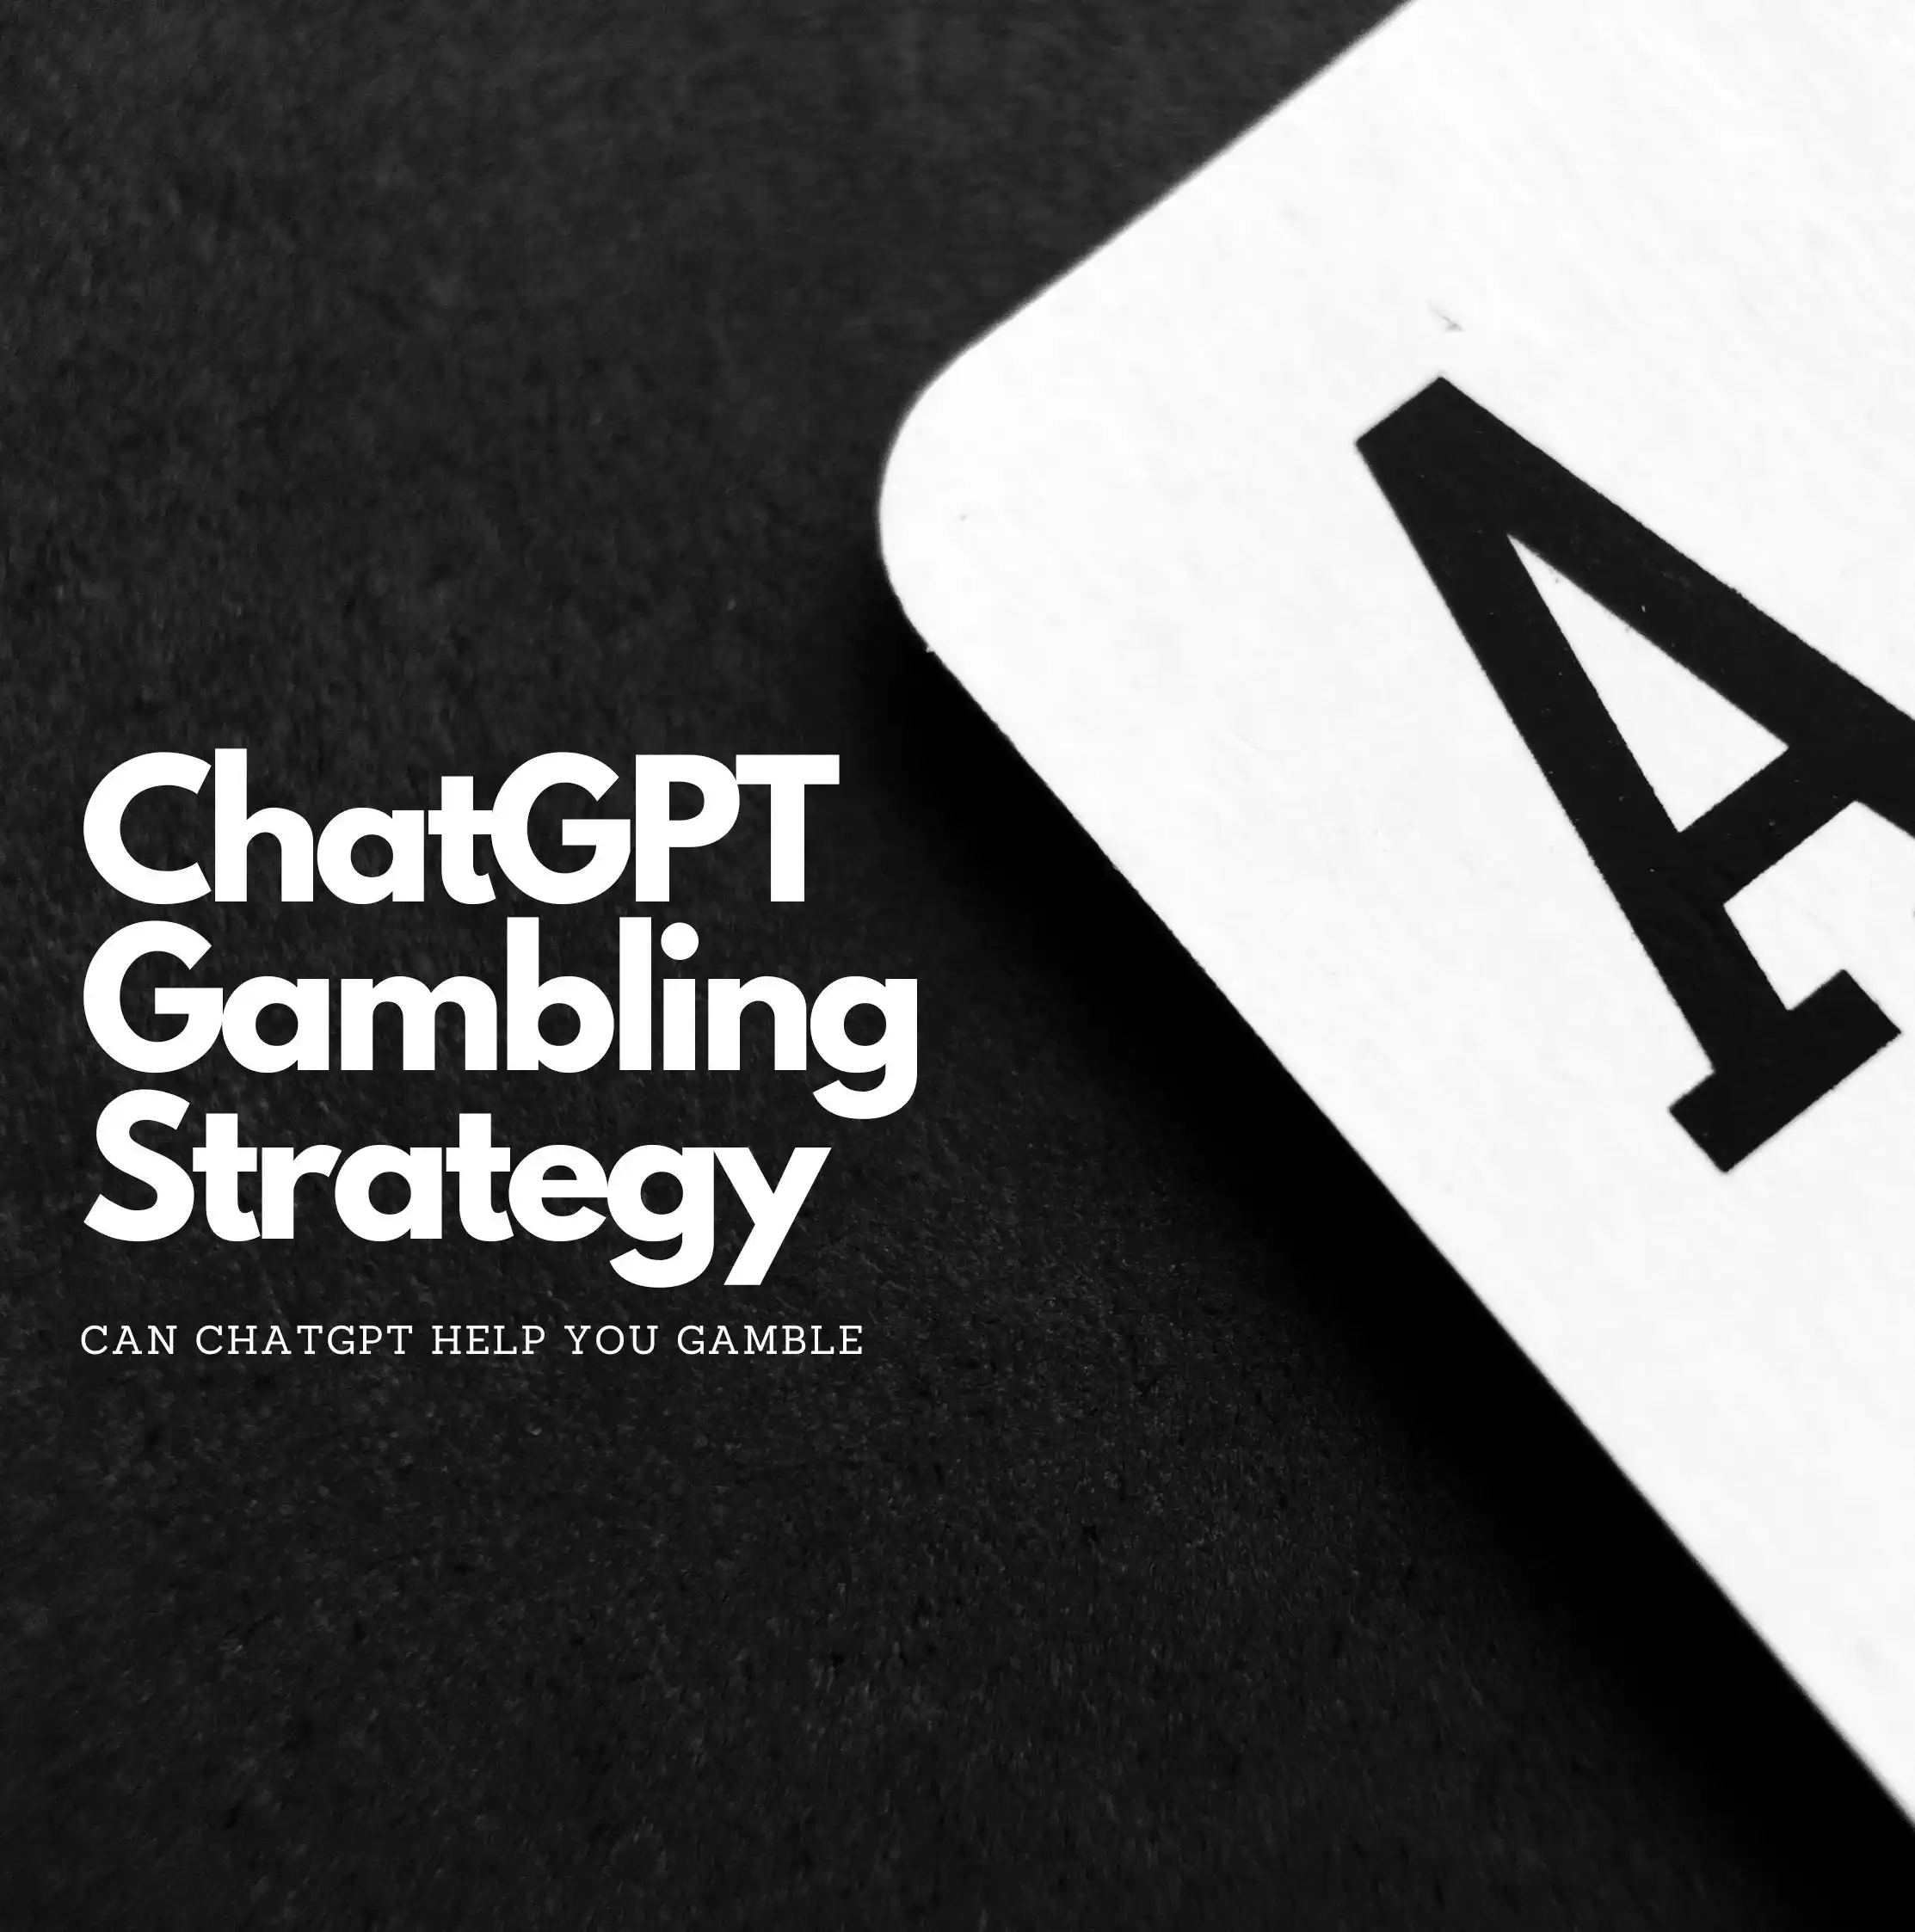 ChatGPT gambling strategy - How ChatGPT can help with gambling